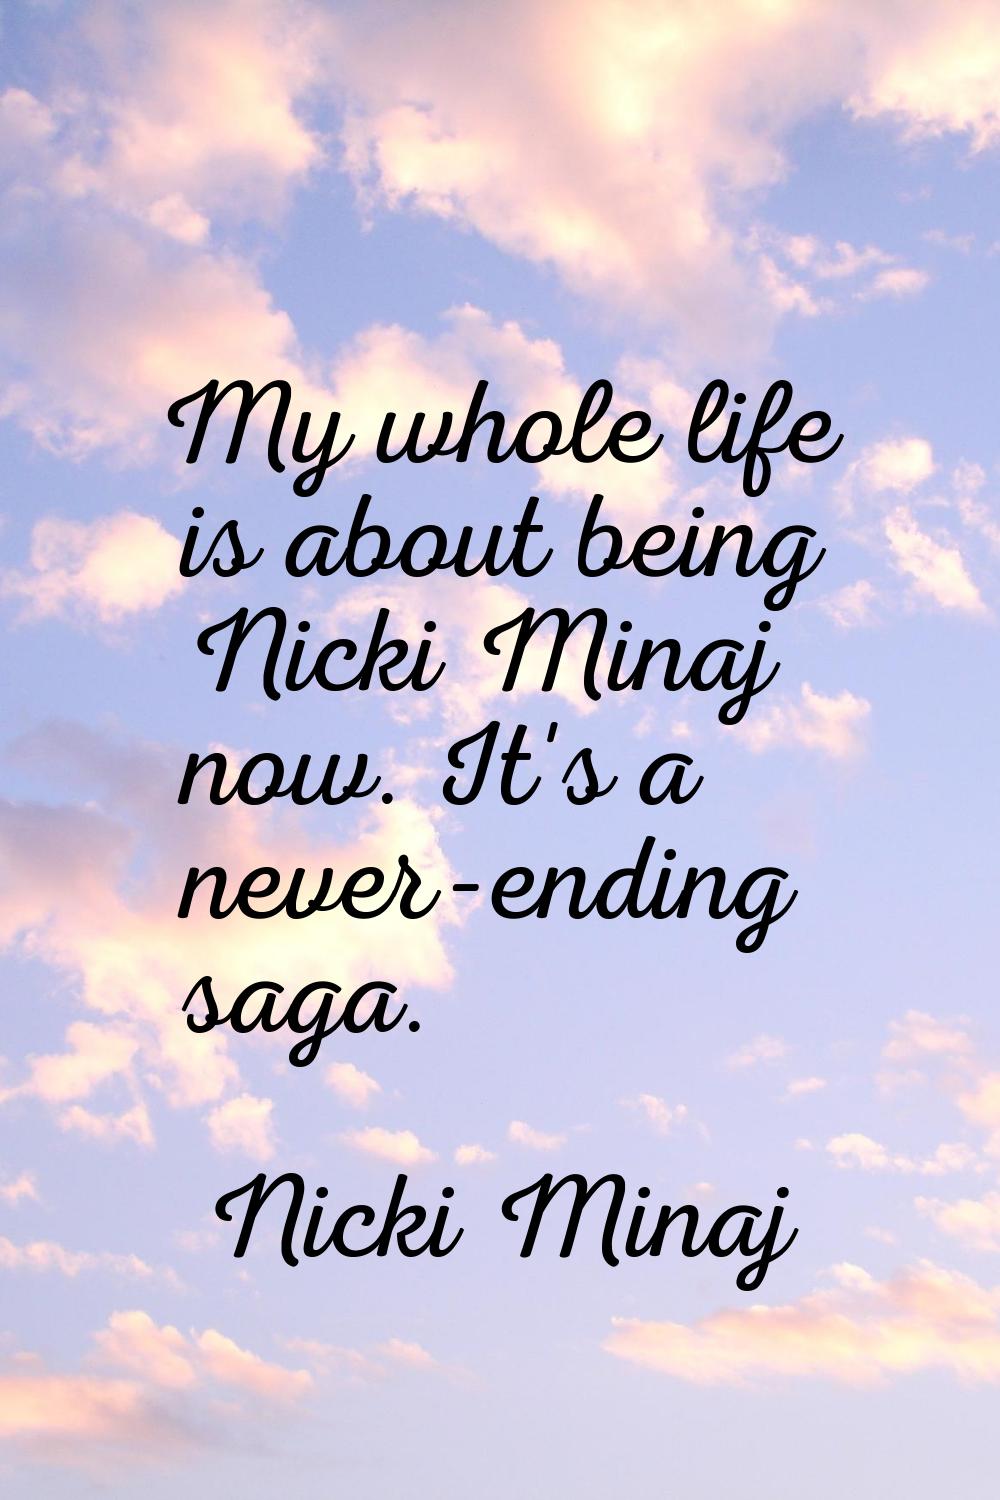 My whole life is about being Nicki Minaj now. It's a never-ending saga.